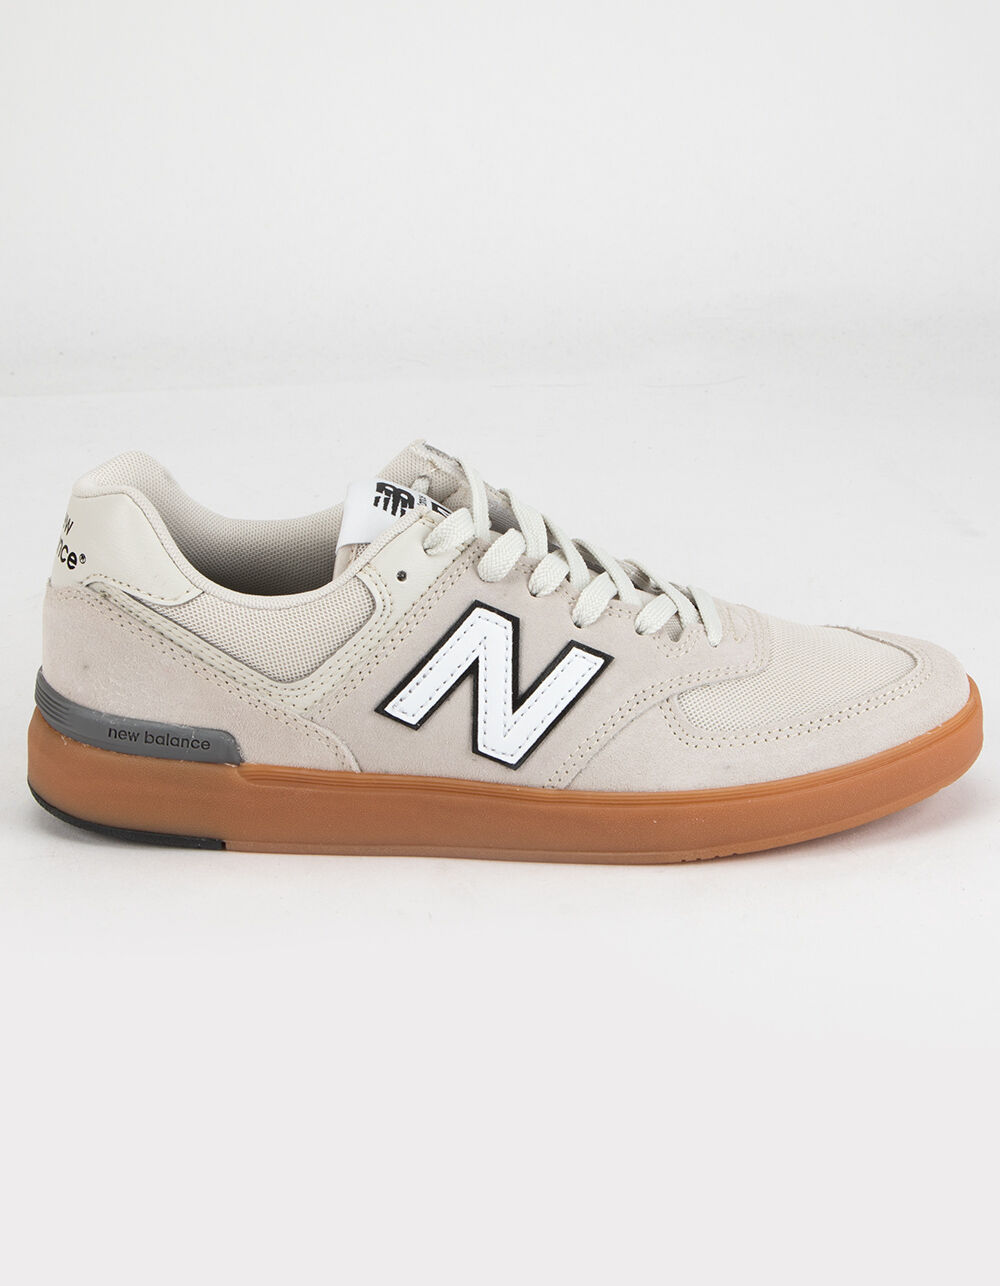 NEW BALANCE All Coasts 574 Mens Shoes - WHITE COMBO | Tillys